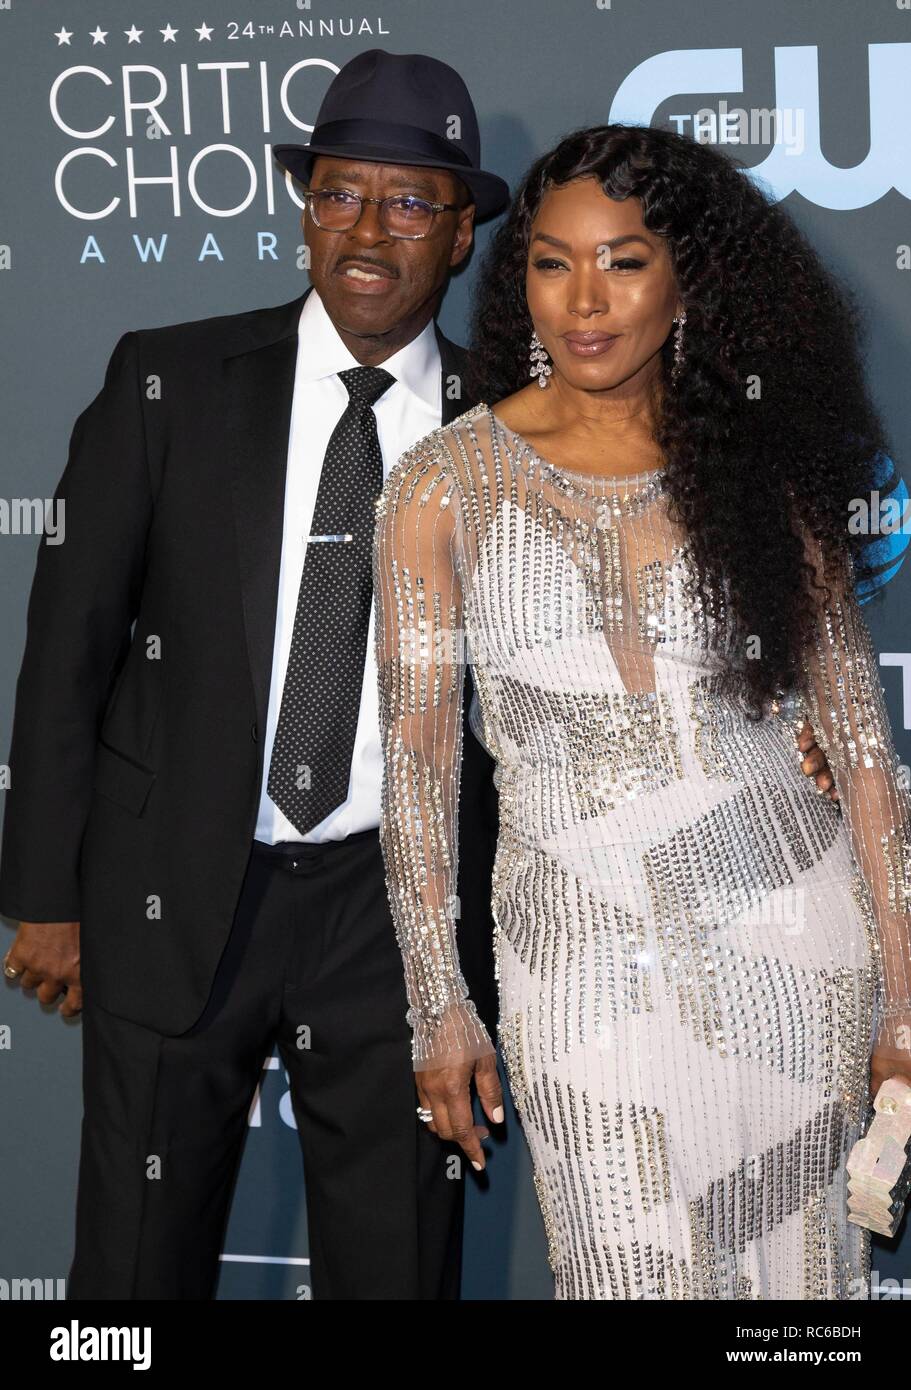 Angela Bassett And Courtney B Vance Attend The Th Annual Critics Choice Awards At Barker